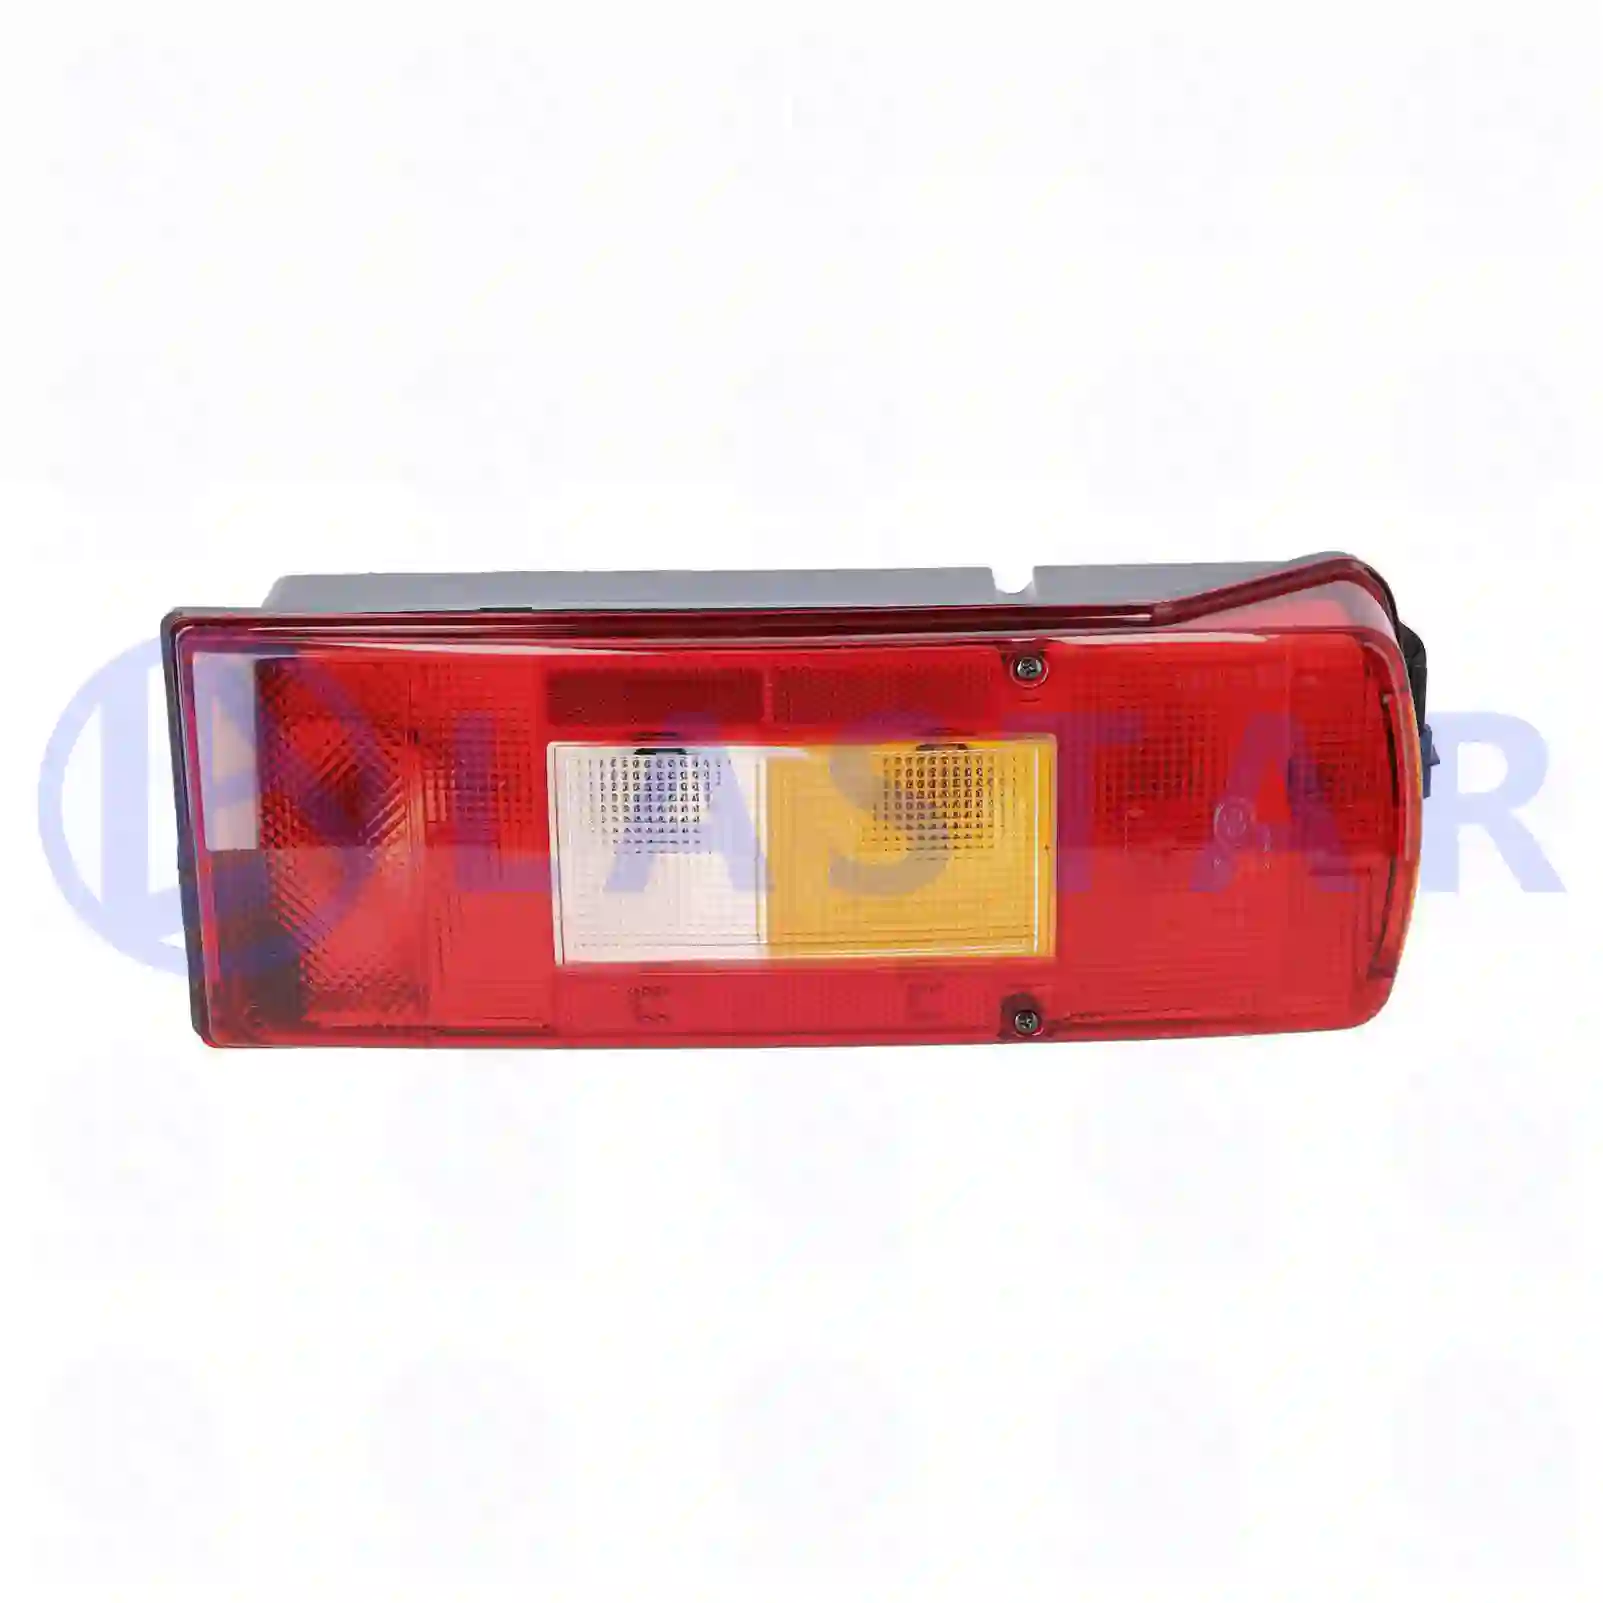 Tail lamp, right, with reverse alarm (built in), 77711034, 20425730, 20507625, 20513087, 20892389, 21097450, 21652946, 21761154, ZG21070-0008 ||  77711034 Lastar Spare Part | Truck Spare Parts, Auotomotive Spare Parts Tail lamp, right, with reverse alarm (built in), 77711034, 20425730, 20507625, 20513087, 20892389, 21097450, 21652946, 21761154, ZG21070-0008 ||  77711034 Lastar Spare Part | Truck Spare Parts, Auotomotive Spare Parts